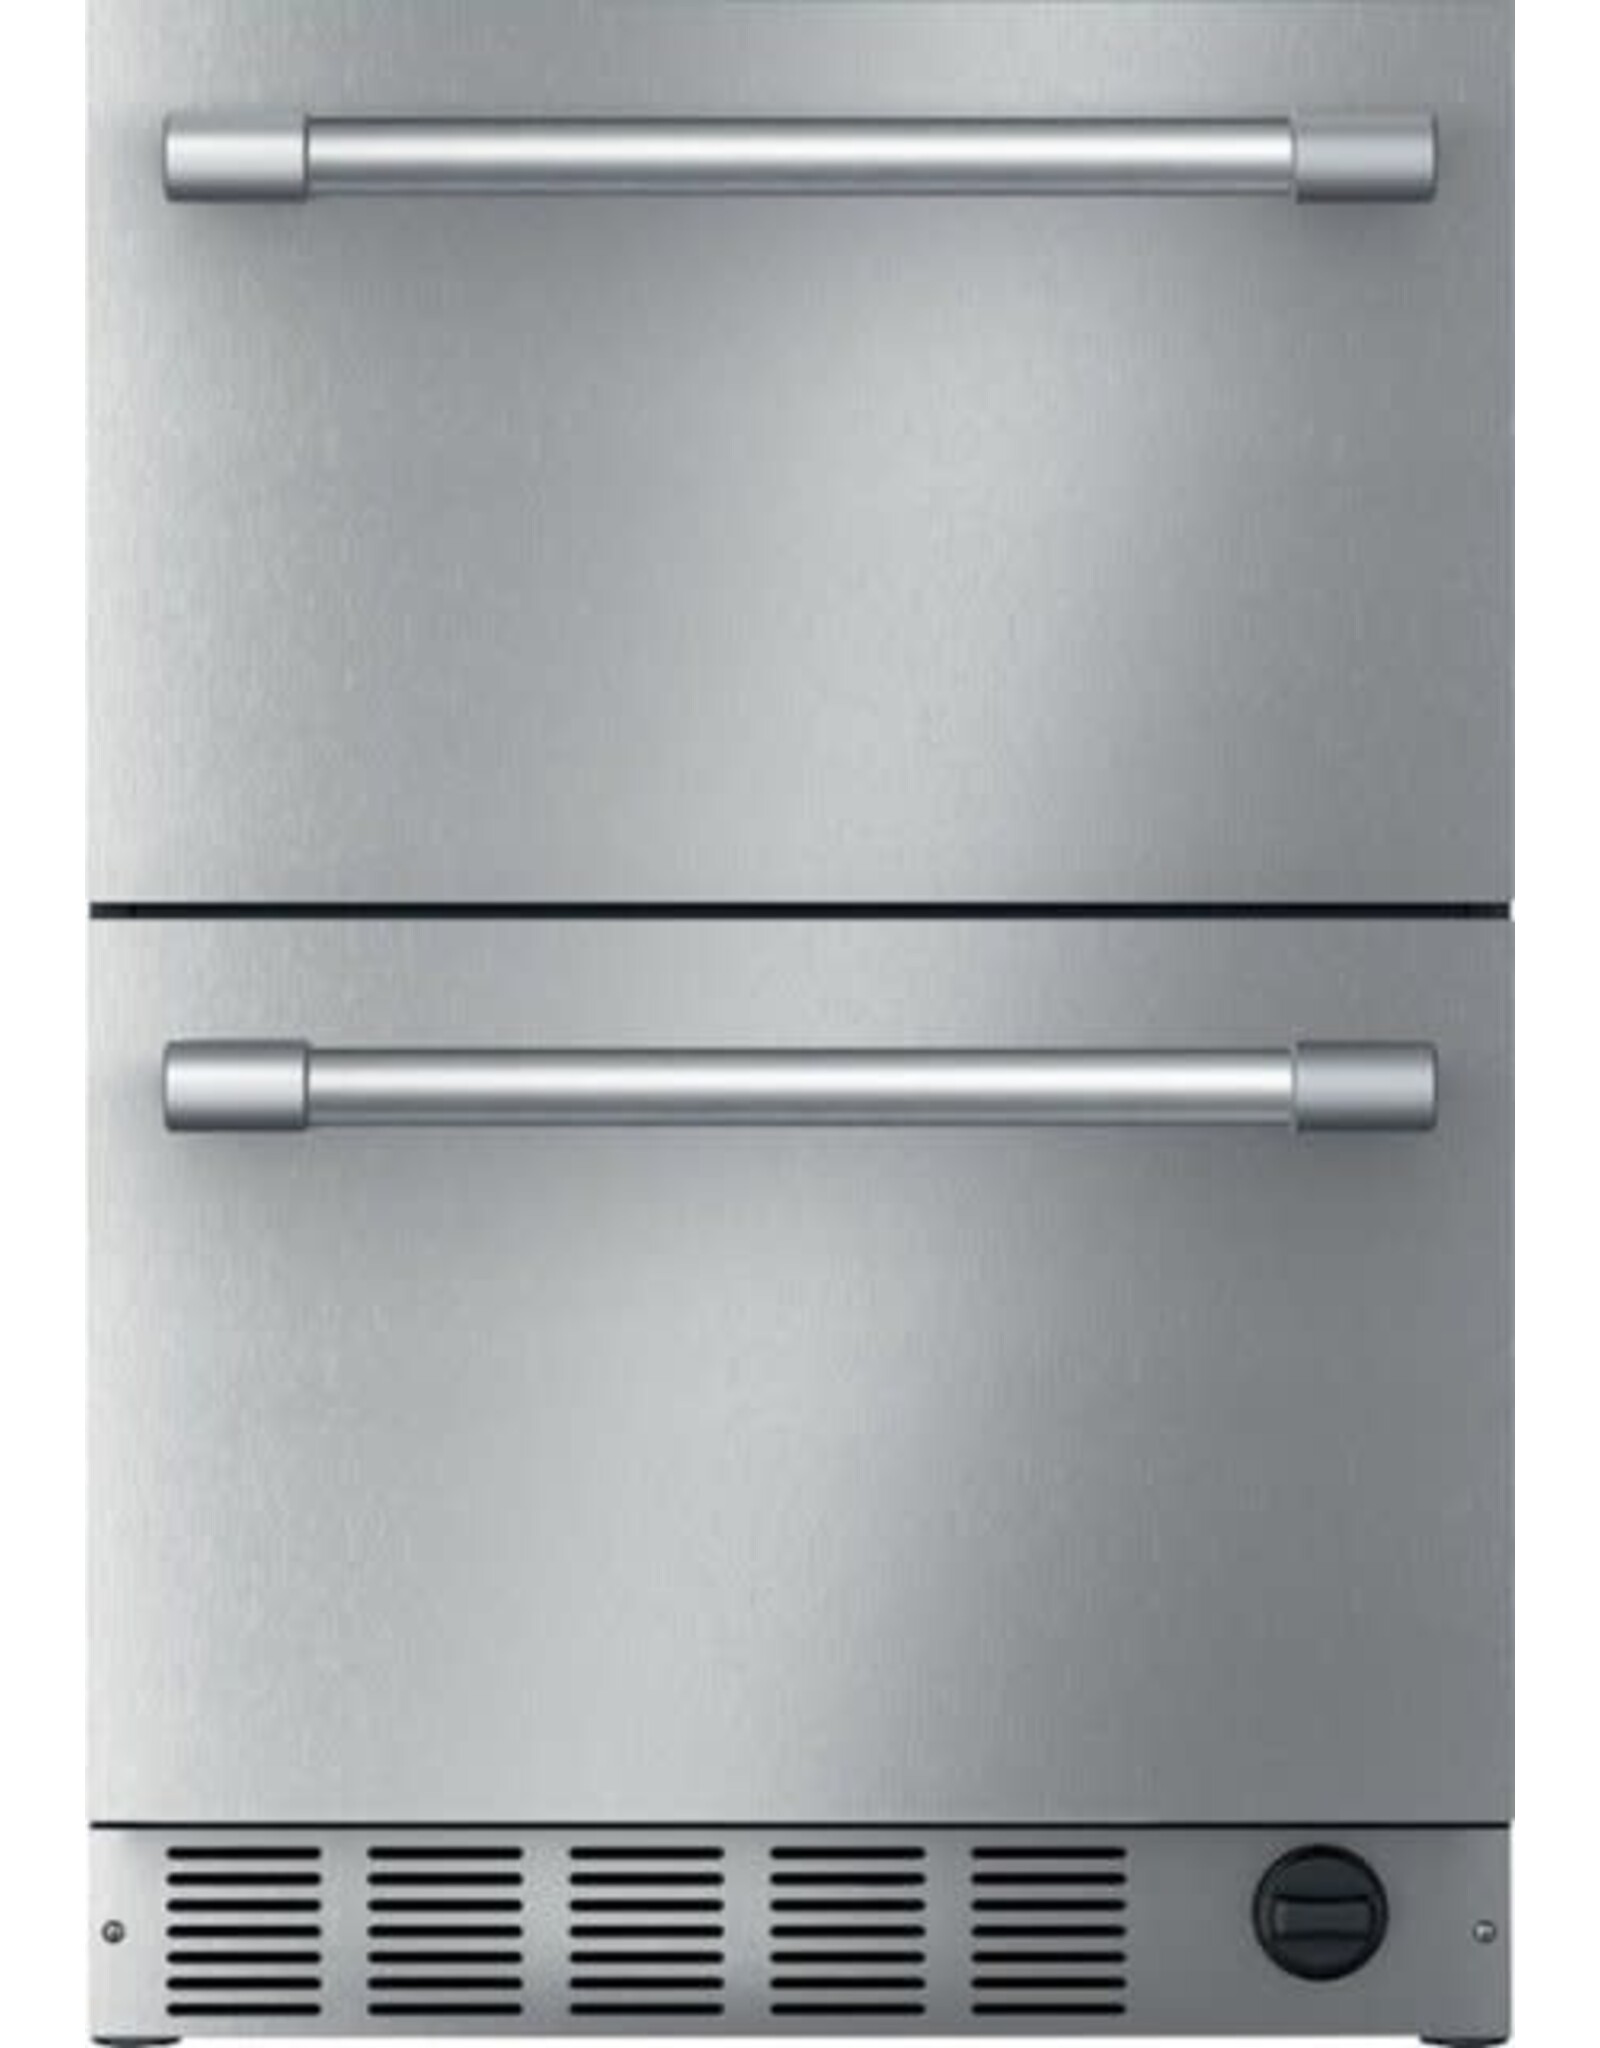 T24UC925DS Thermador - 4.3 Cu. Ft. Built-In Double Drawer Under-Counter Refrigerator/Freezer with Professional Series Handle - Stainless Steel